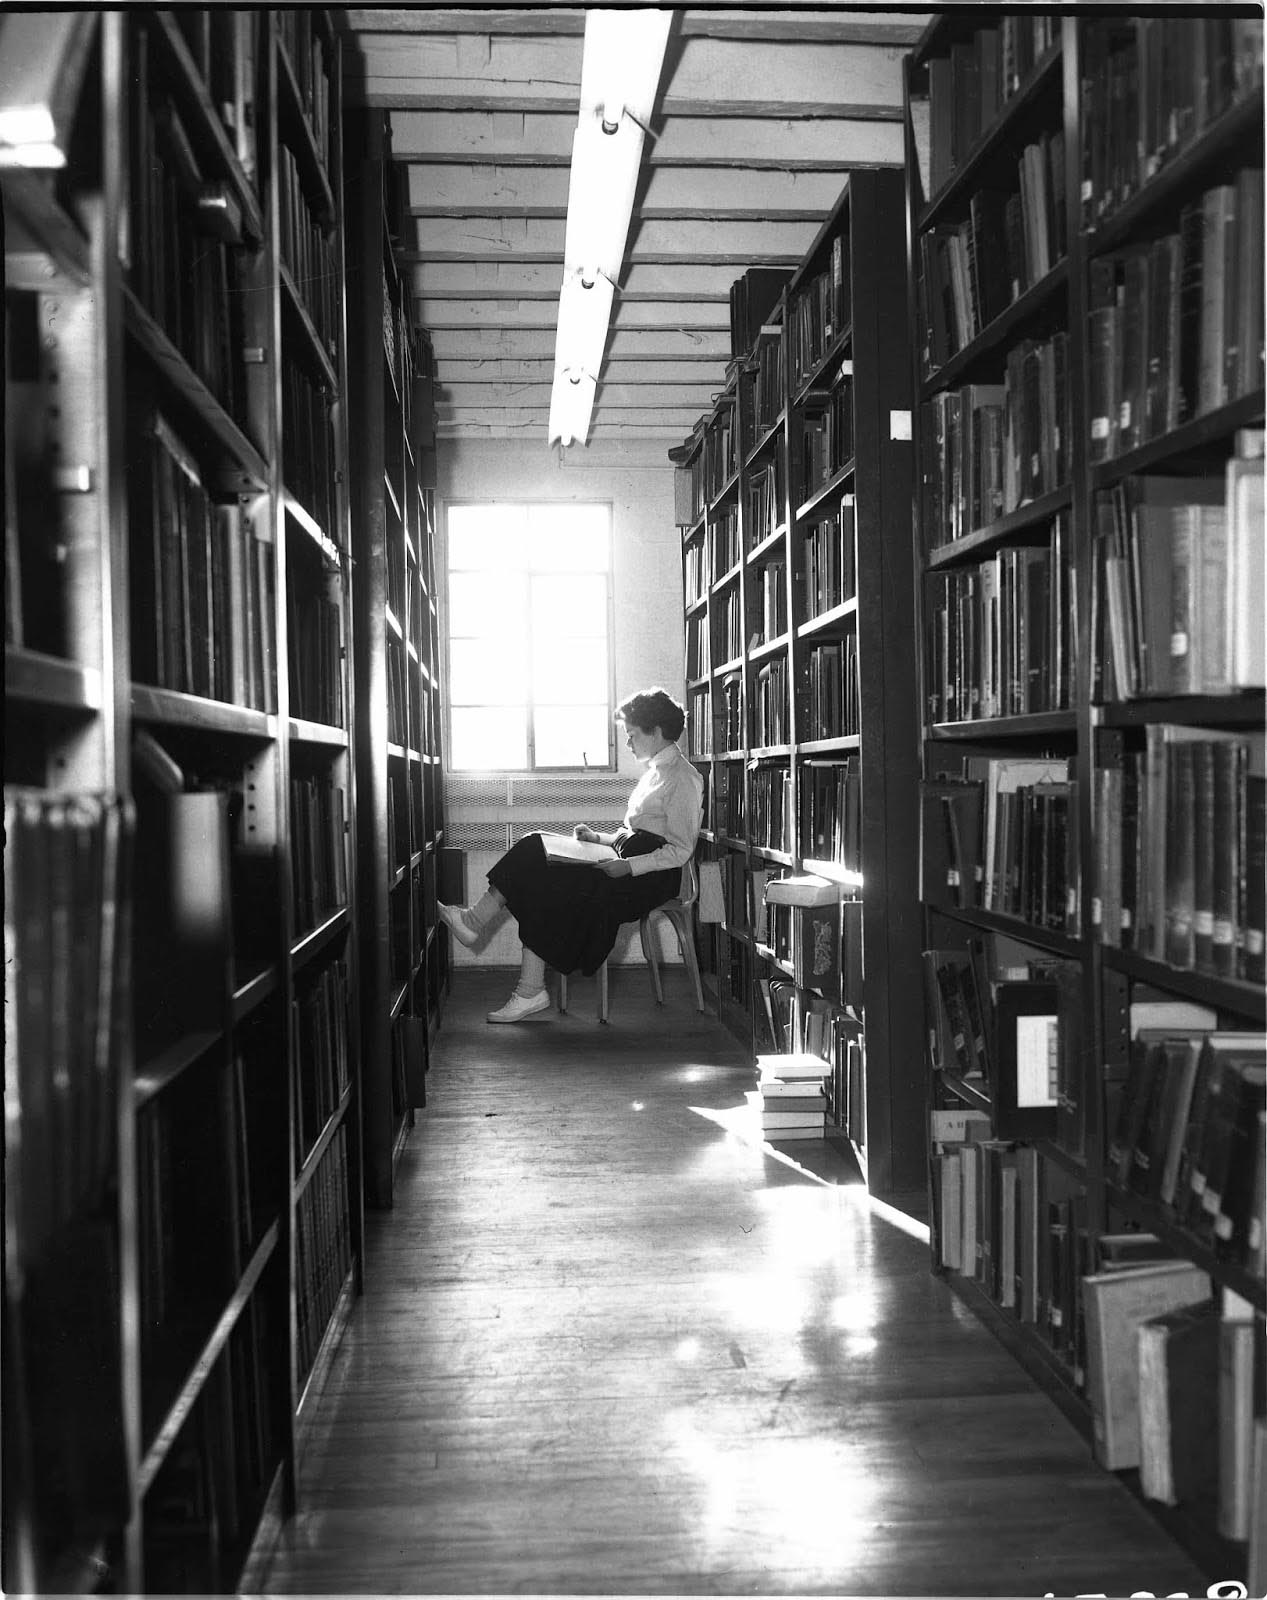 Black and white photo of the library stacks with a student sitting at the end.